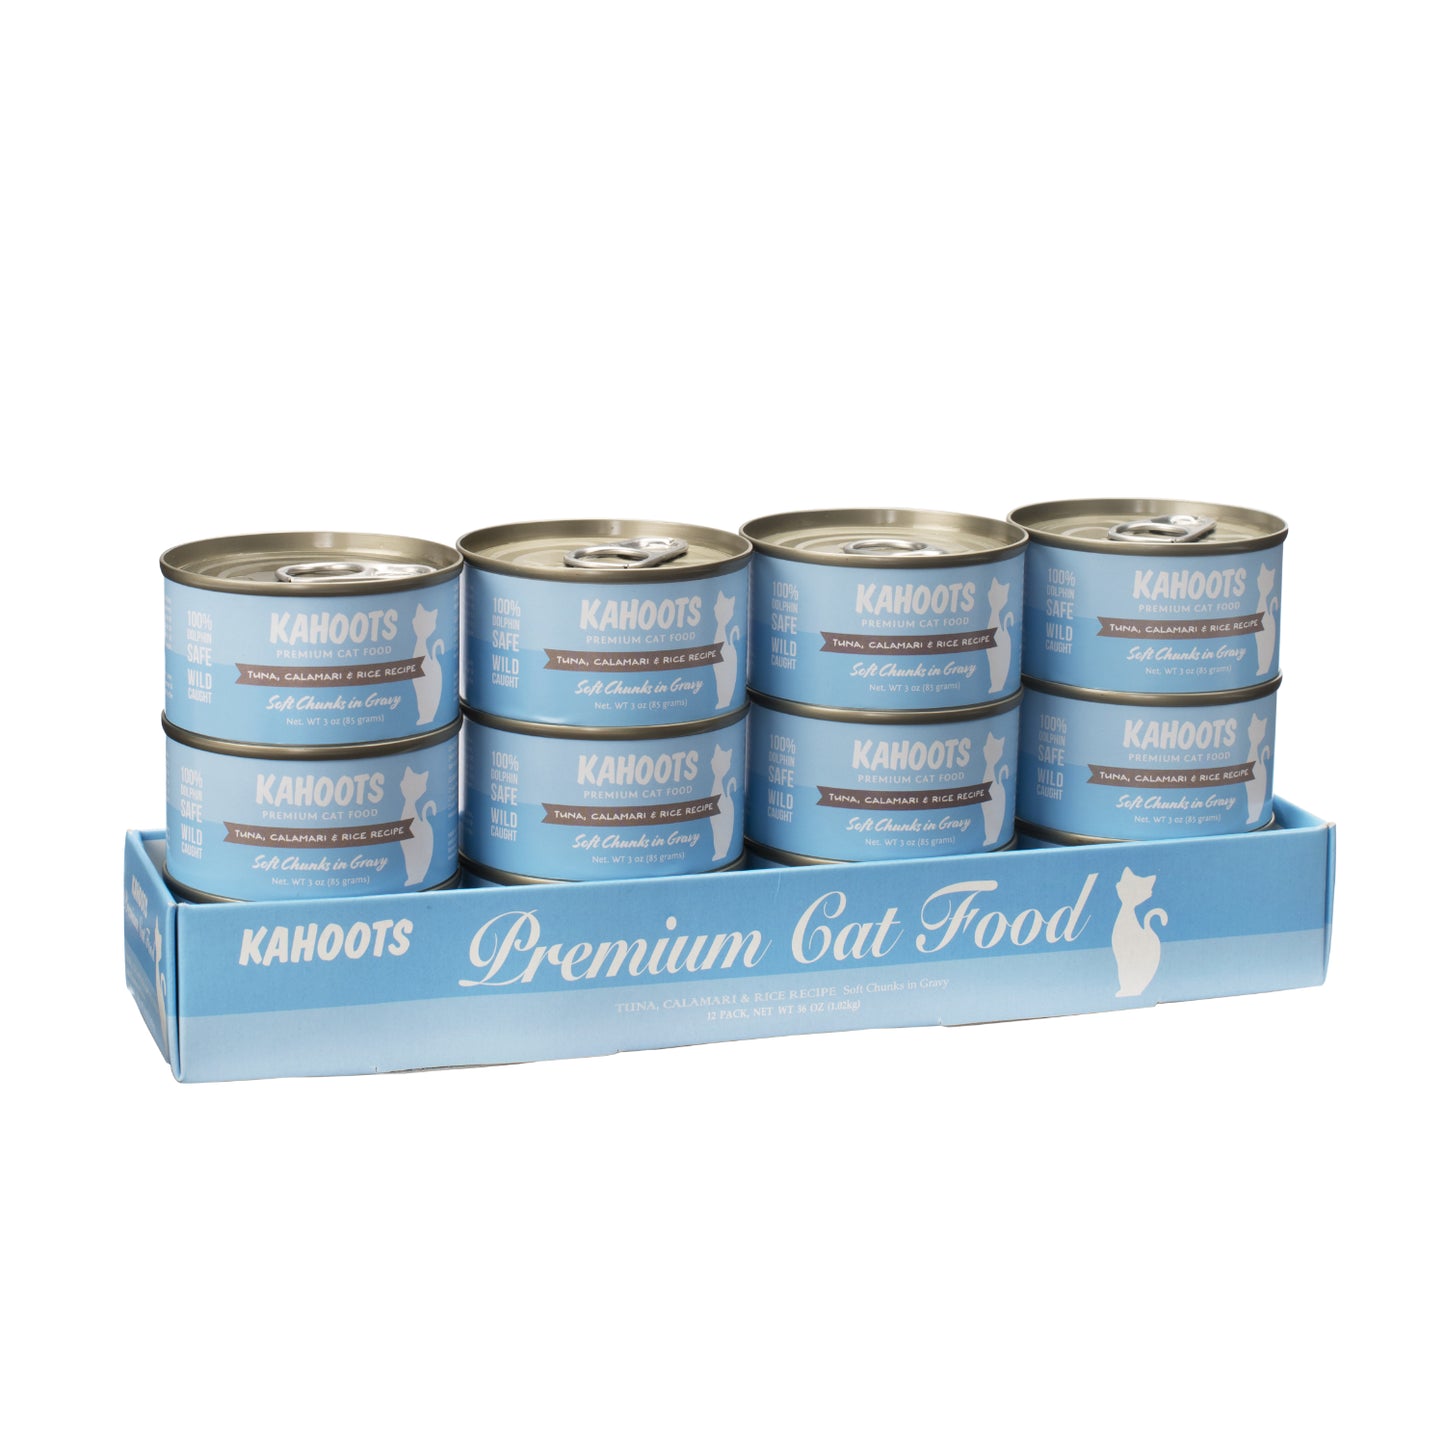 Case quantity of Tuna, Calamari, and rice wet cat food. Picture of a white cat over a blue background on label